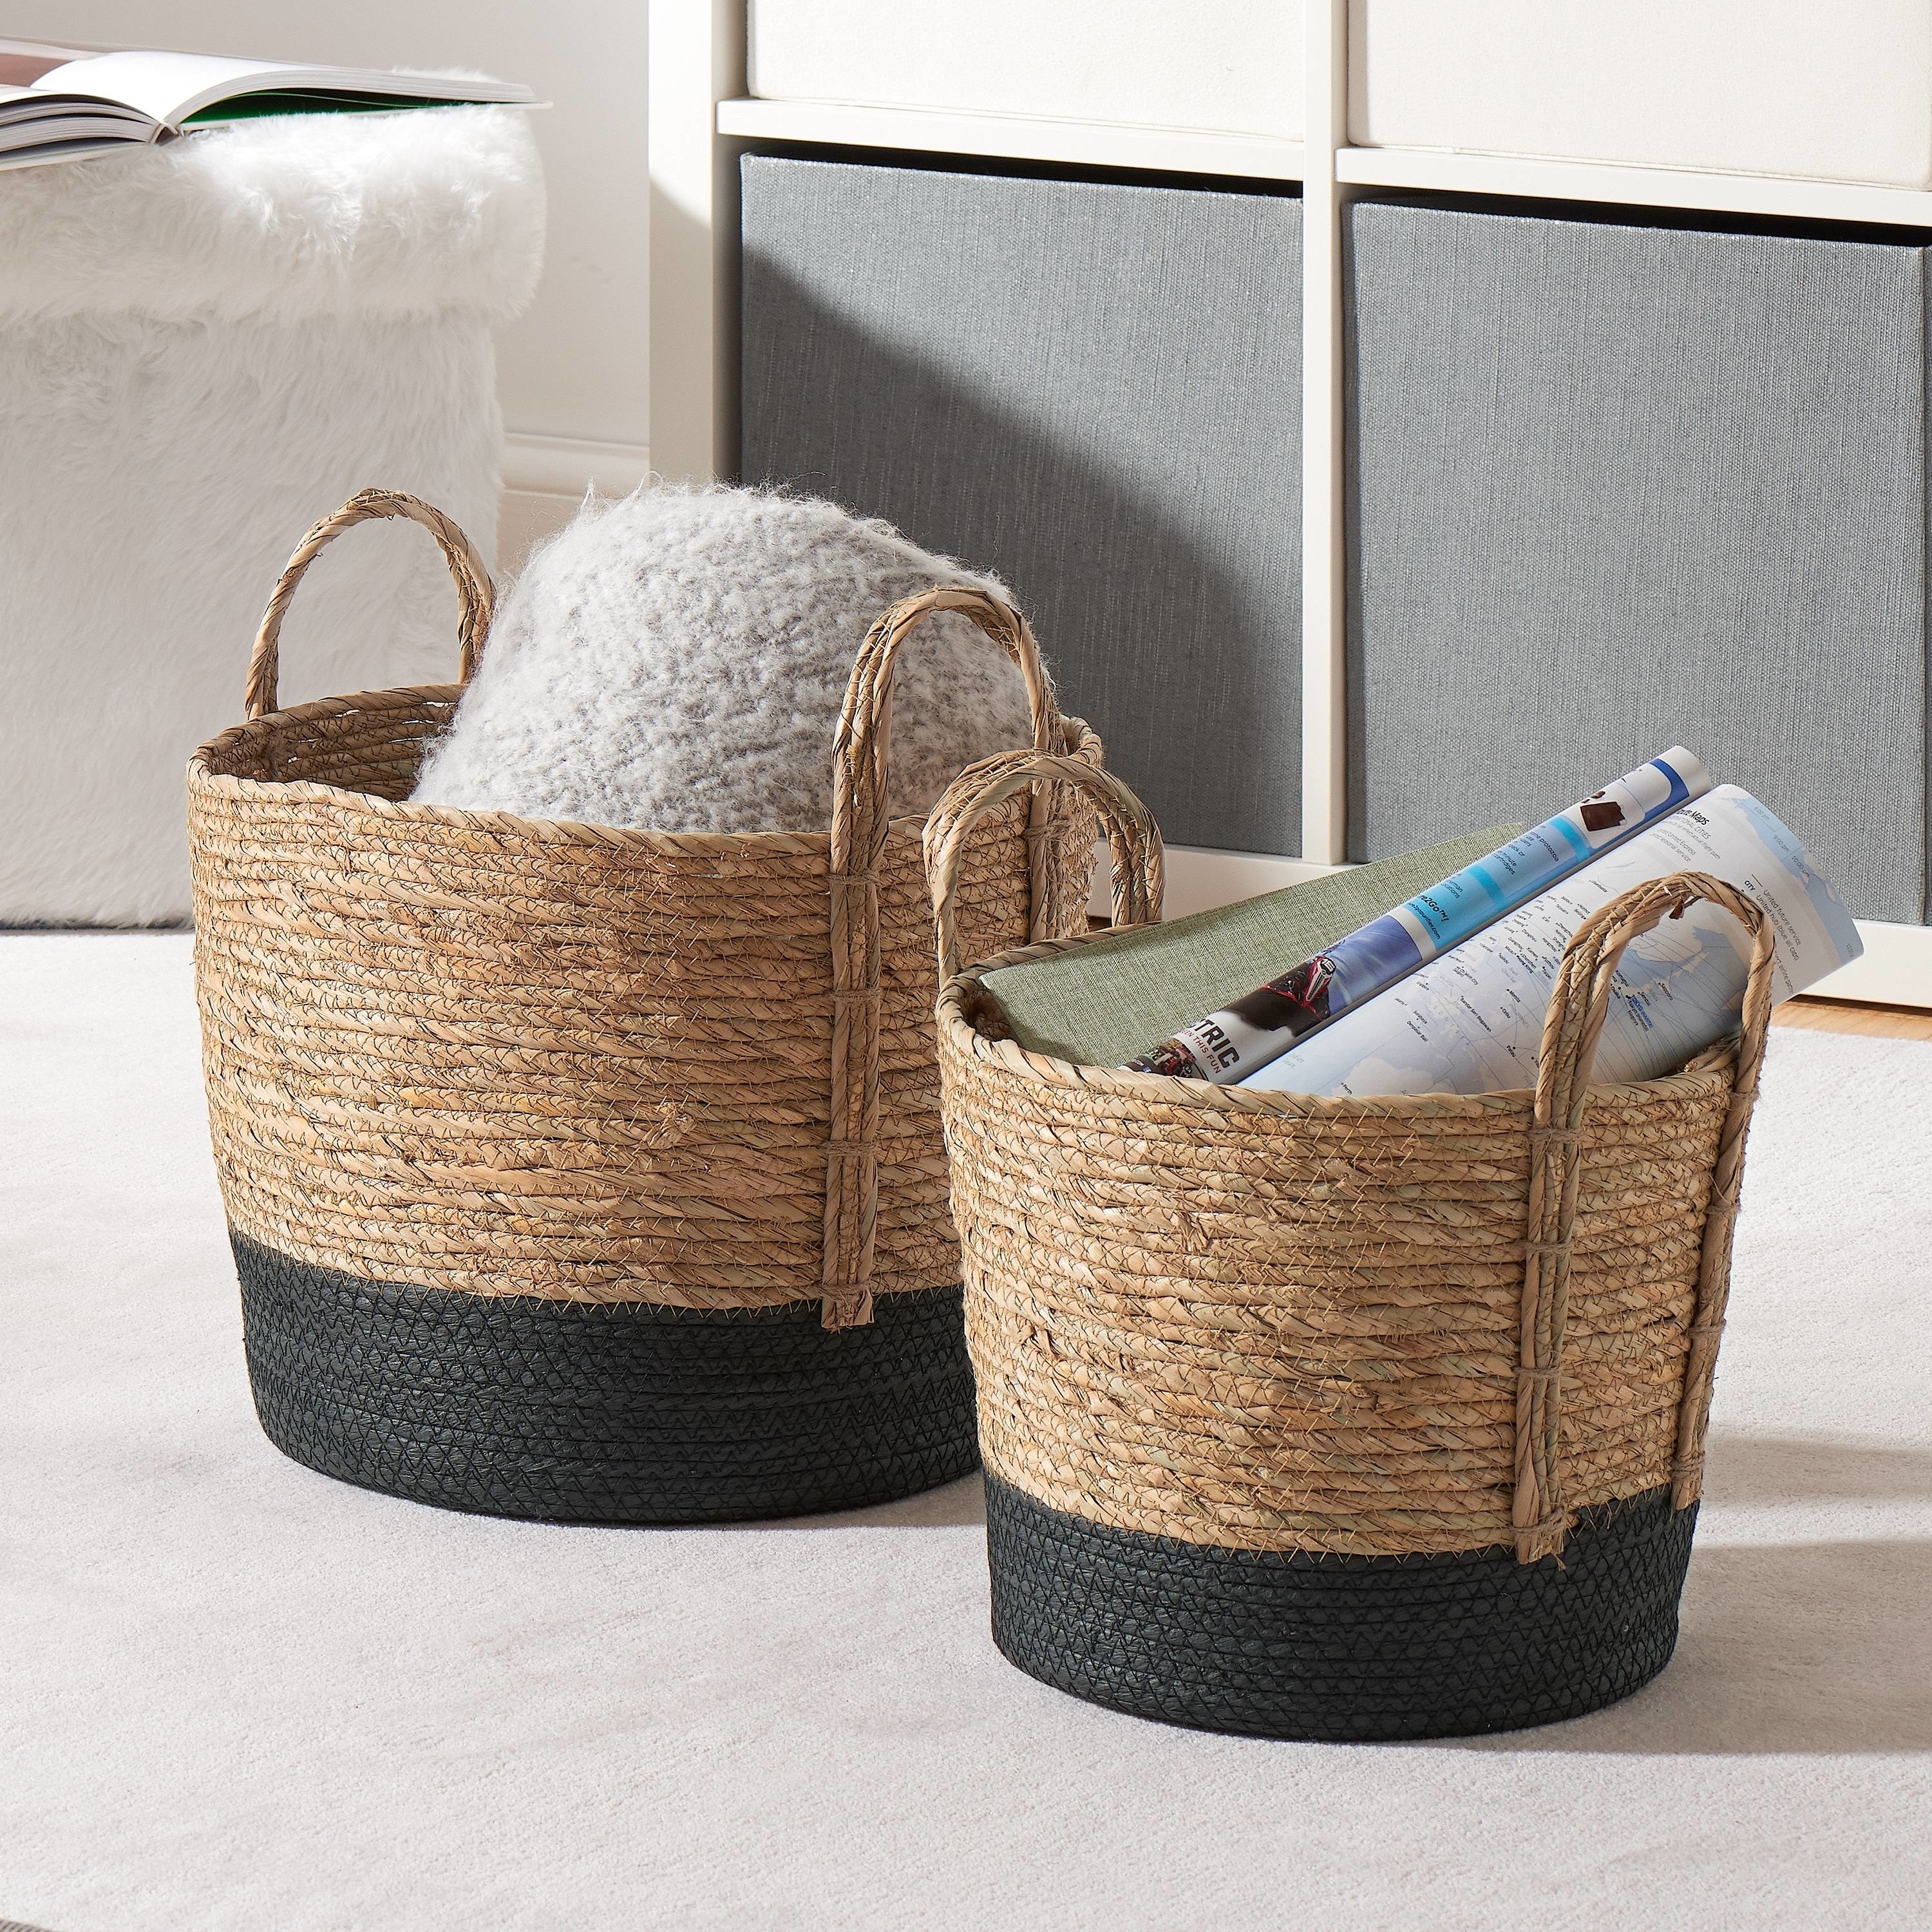 Two natural colored woven baskets with black bottoms and handles sitting on the floor